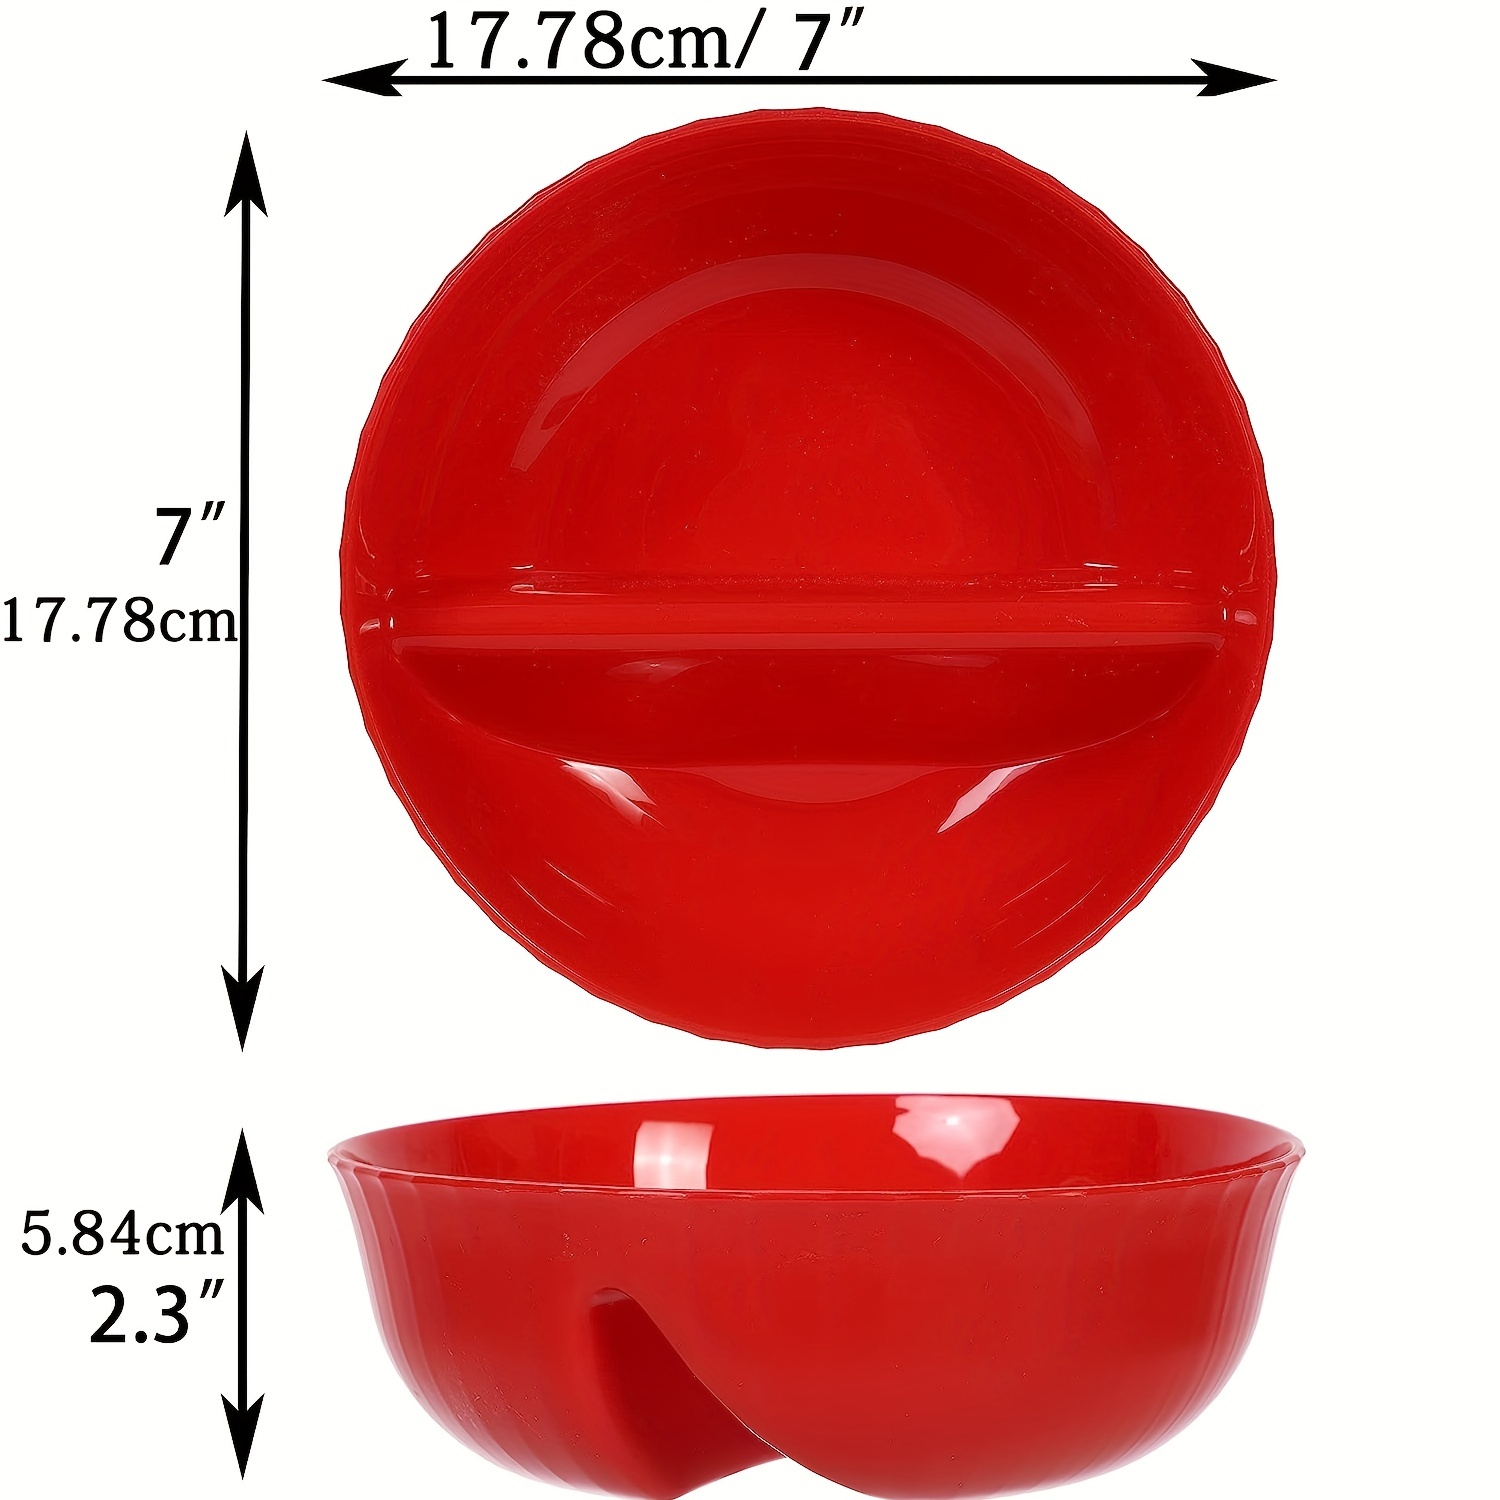 Just Crunch Anti-Soggy Cereal Bowl - Bpa-Free Divided Bowls for